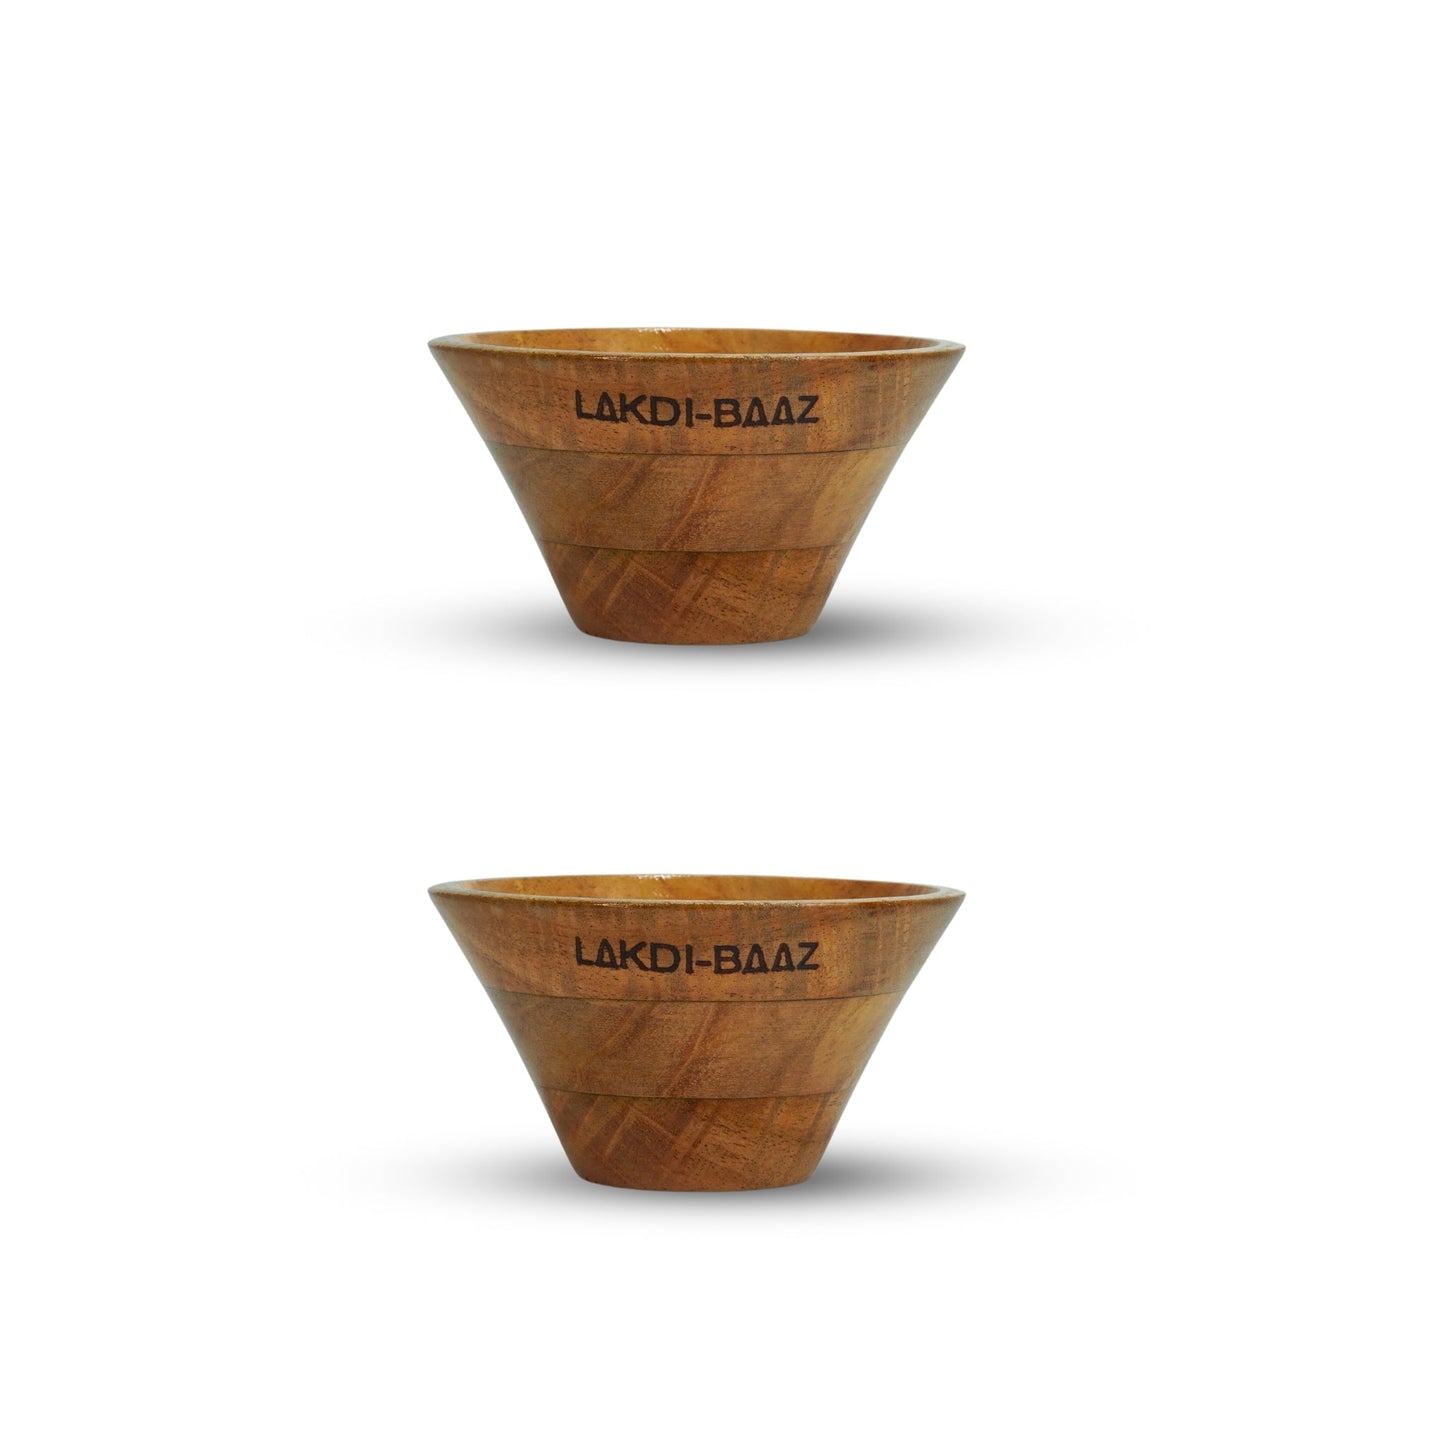 Buy Natural Non Toxic Wooden Bowl Snack Serving Bowl Made From Neem Wood No Color Used 1PC Teak